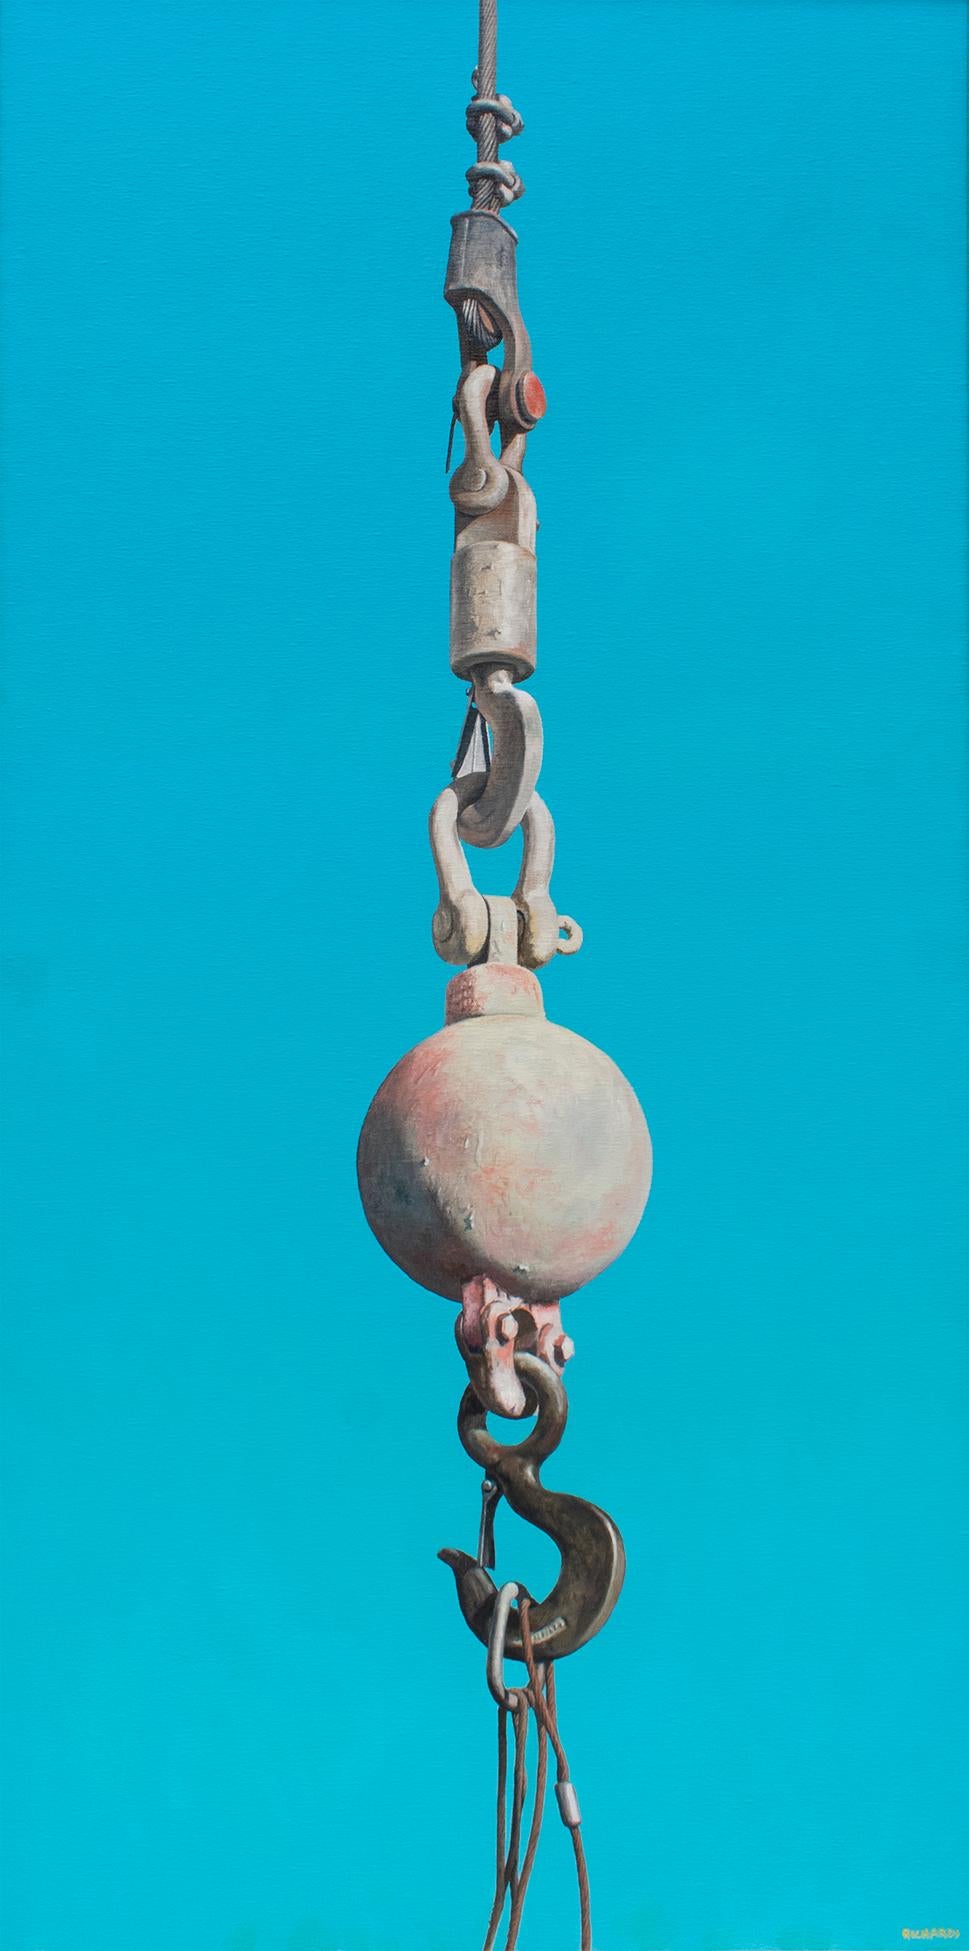 Pink Ball & Hook (Photorealist Oil Painting of Industrial Equipment on Blue)